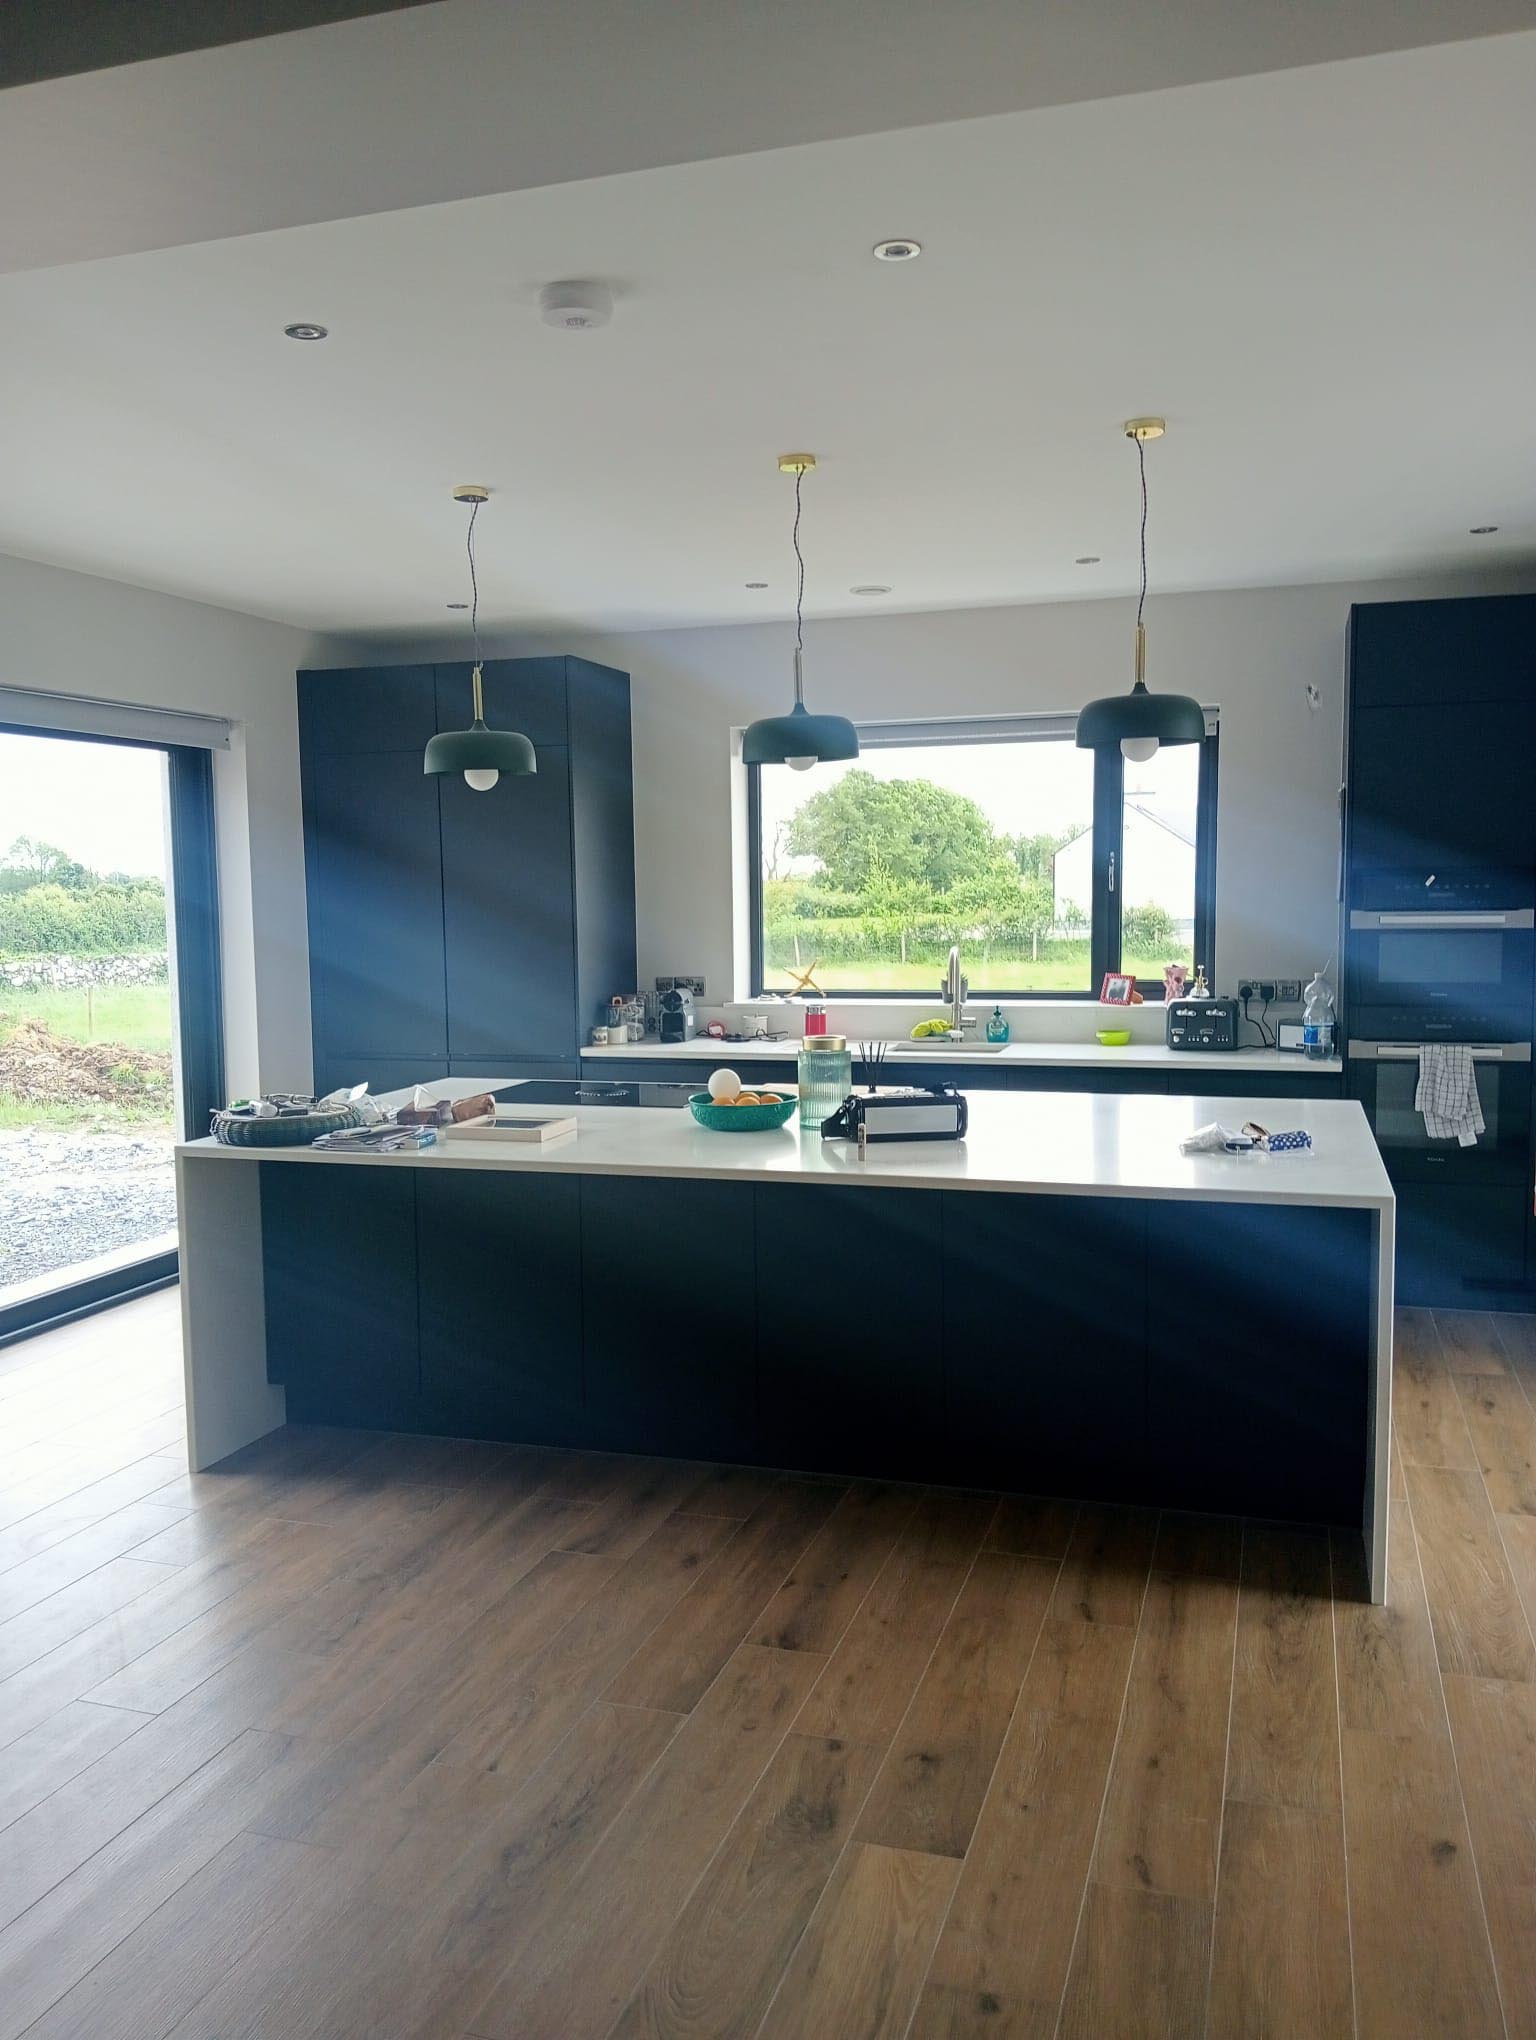 Donal Deely A2 Rated House Kitchen